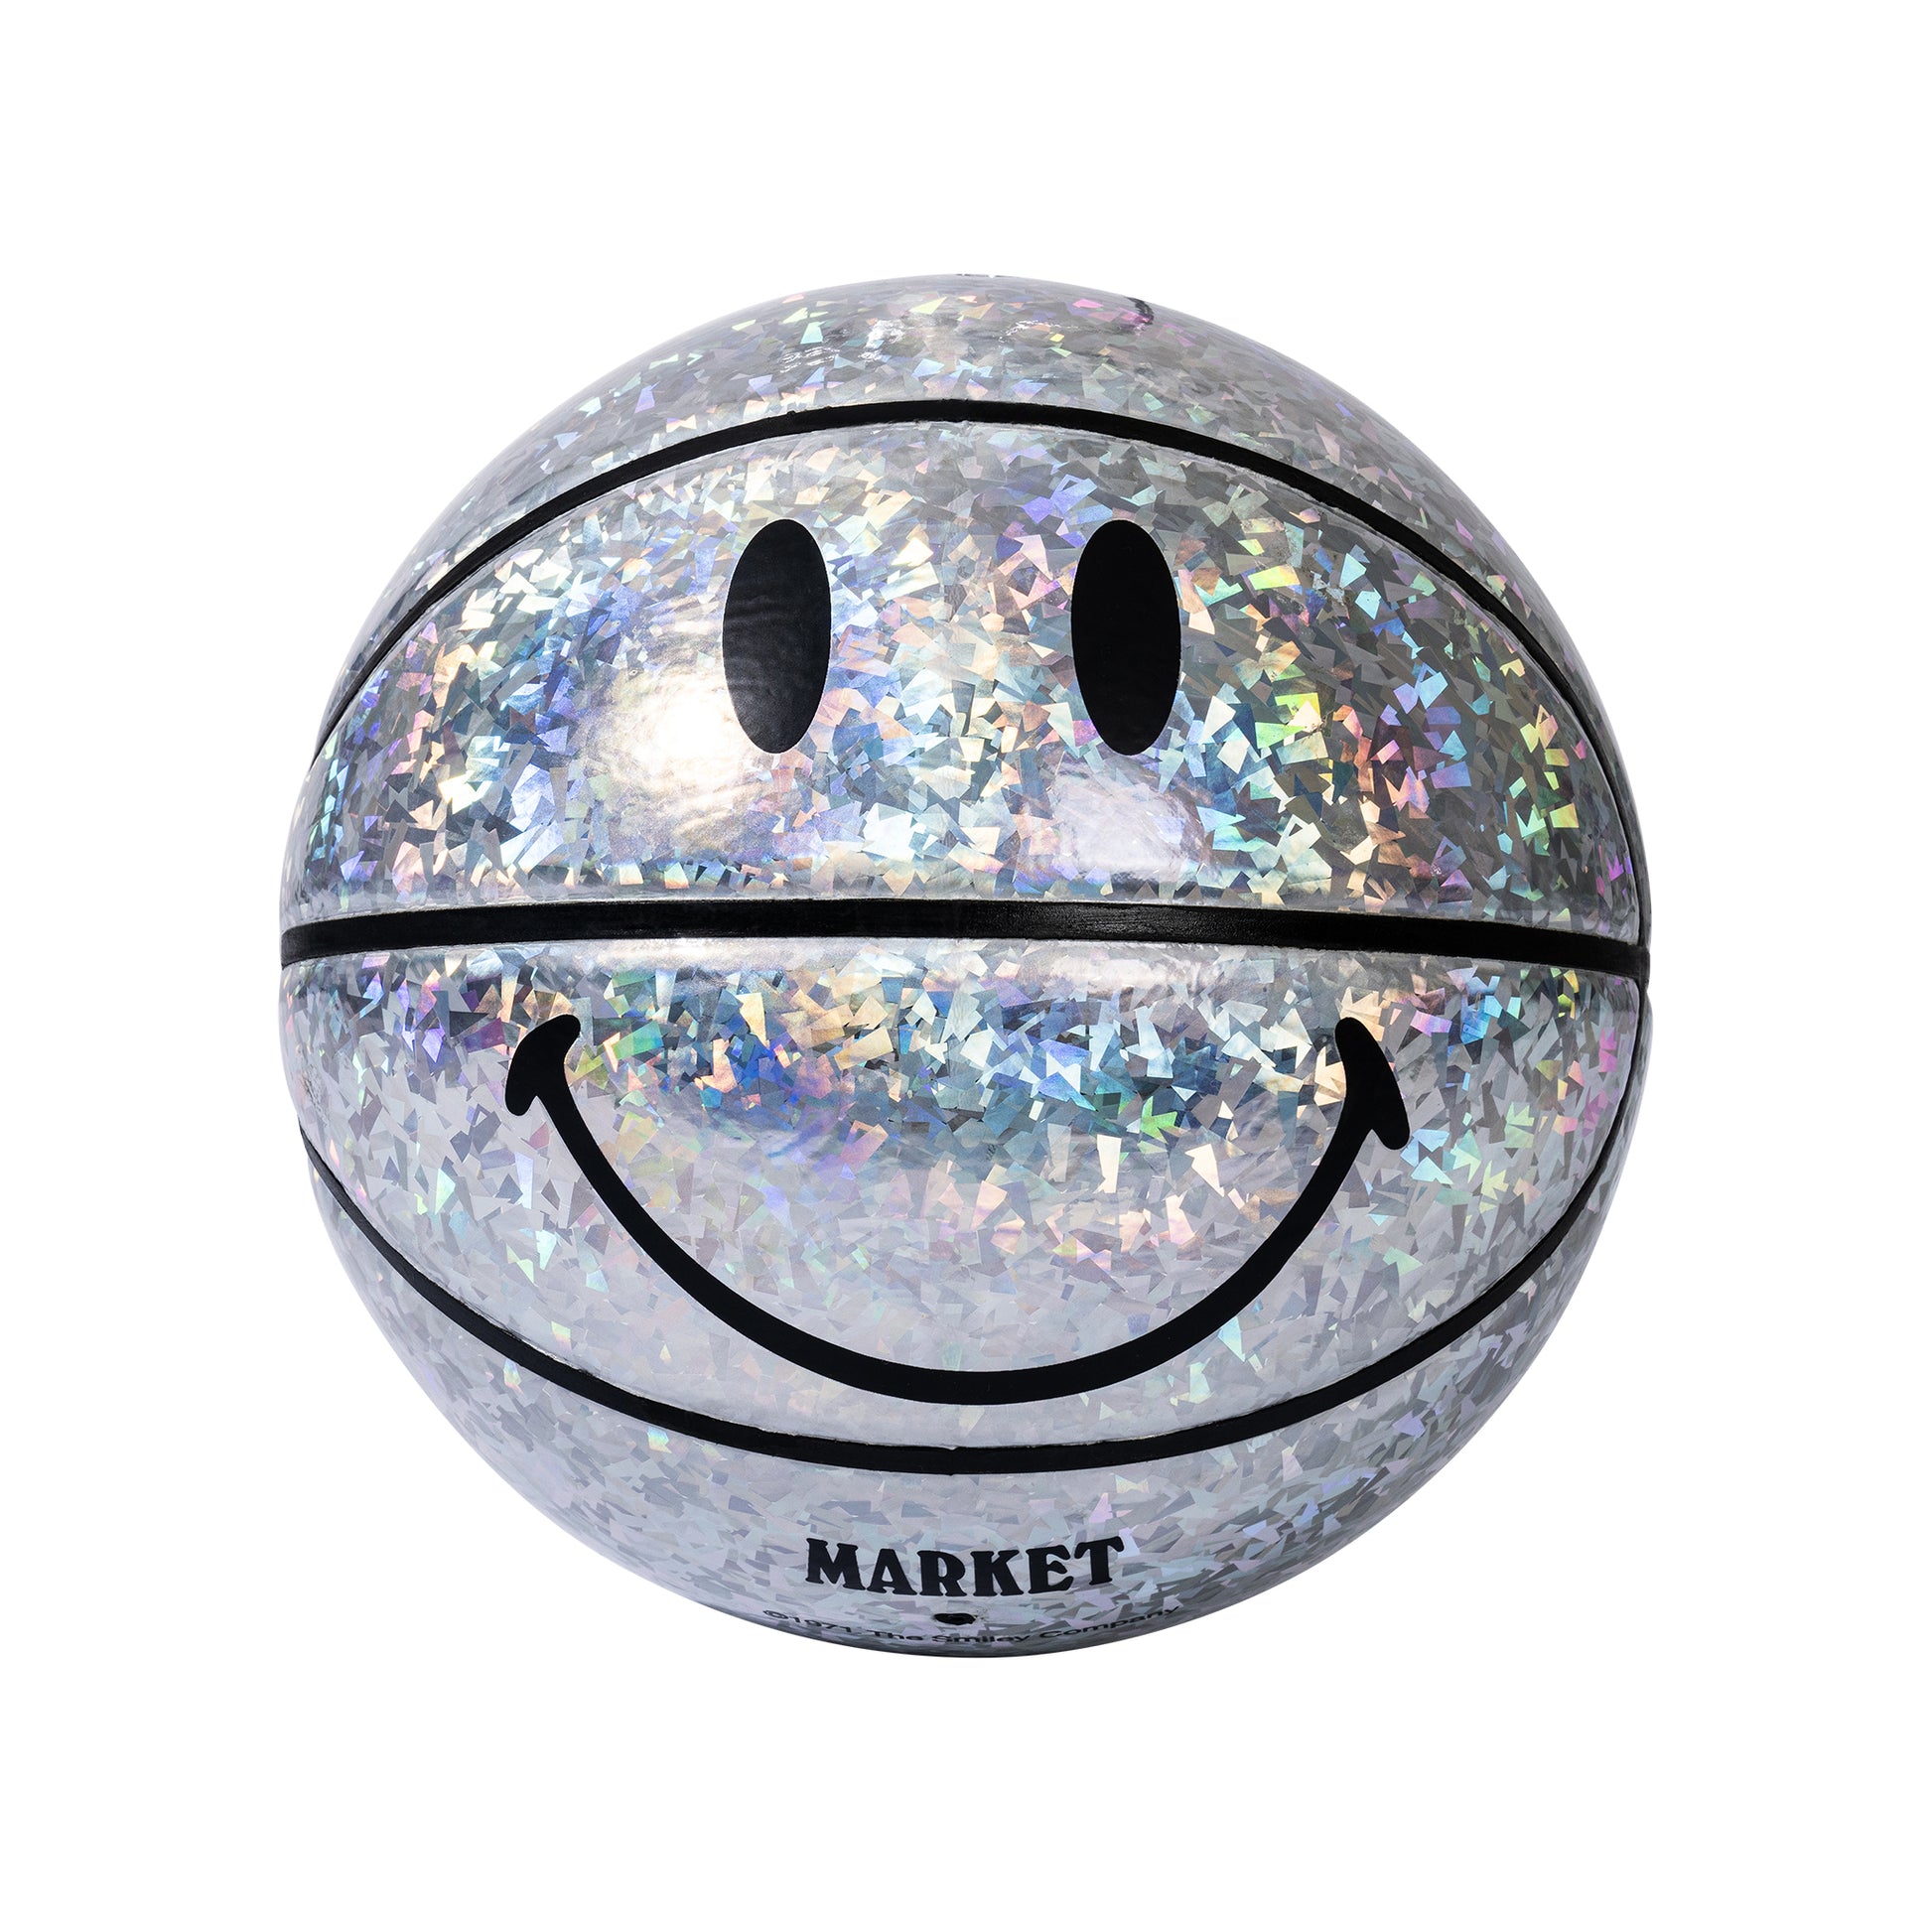 MARKET clothing brand SMILEY HOLOGRAM BASKETBALL. Find more basketballs, sporting goods, homegoods and graphic tees at MarketStudios.com. Formally Chinatown Market. 